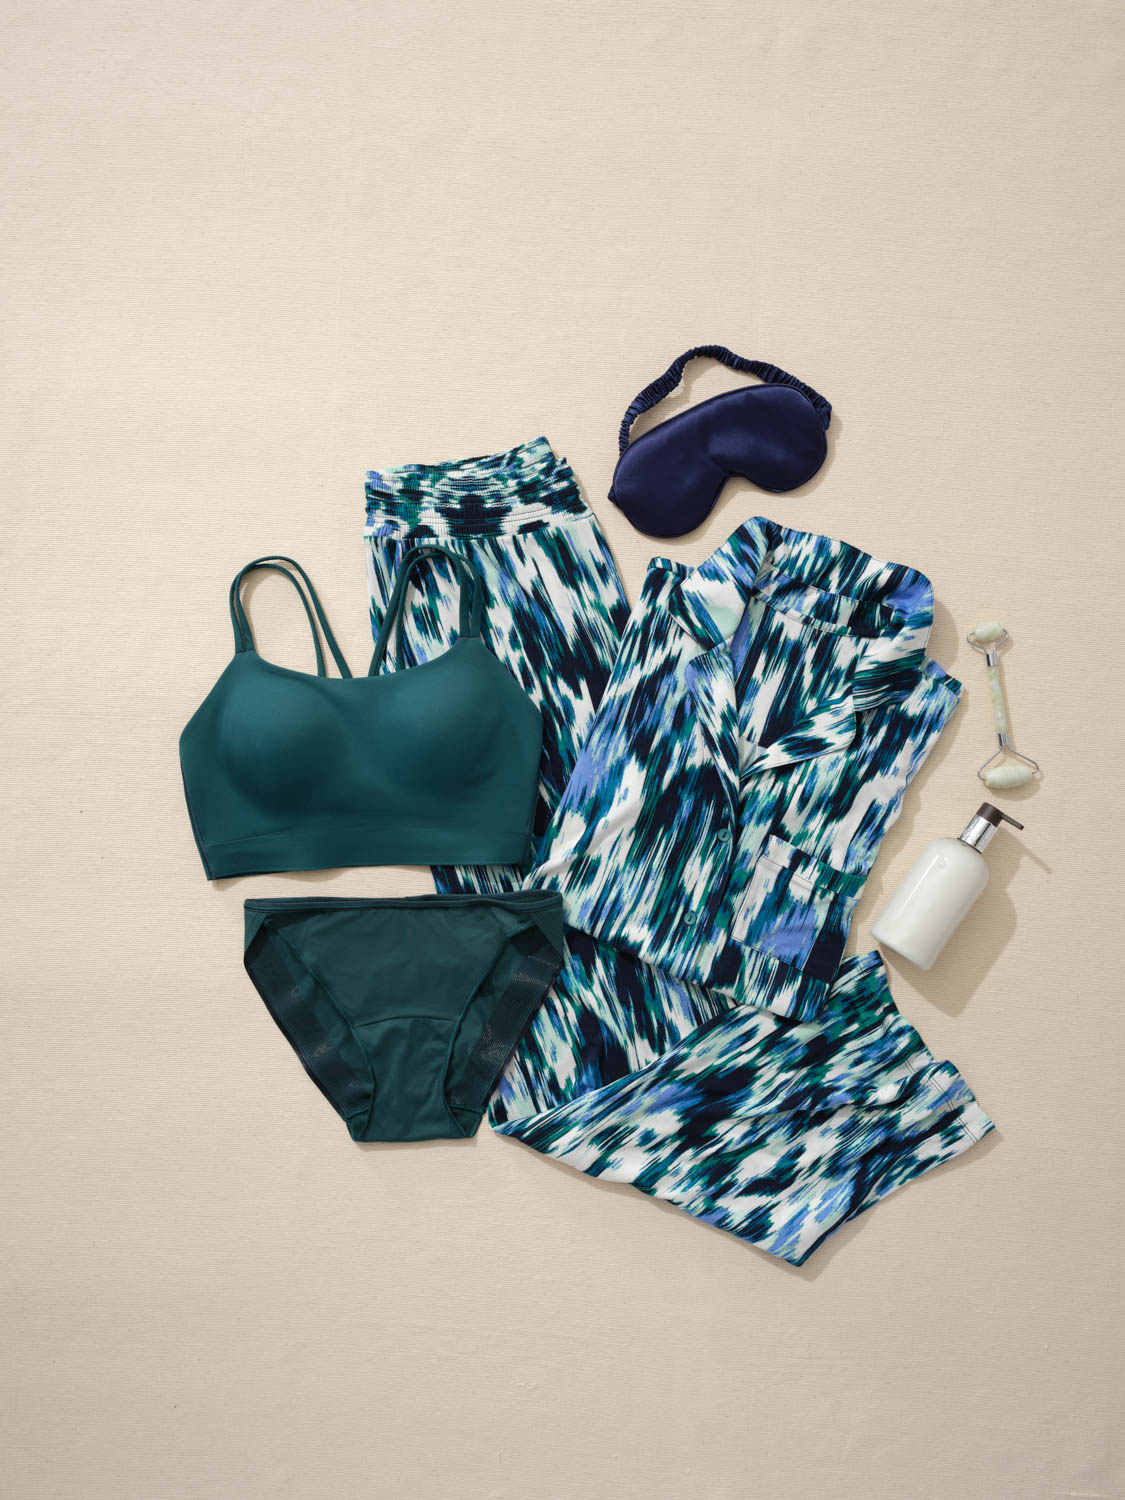 Soma<sup class=st-superscript>®</sup> laydown of green bralette and matching panties, matching multi-colored printed pajamas, eye mask, jade roller, and lotion bottle.